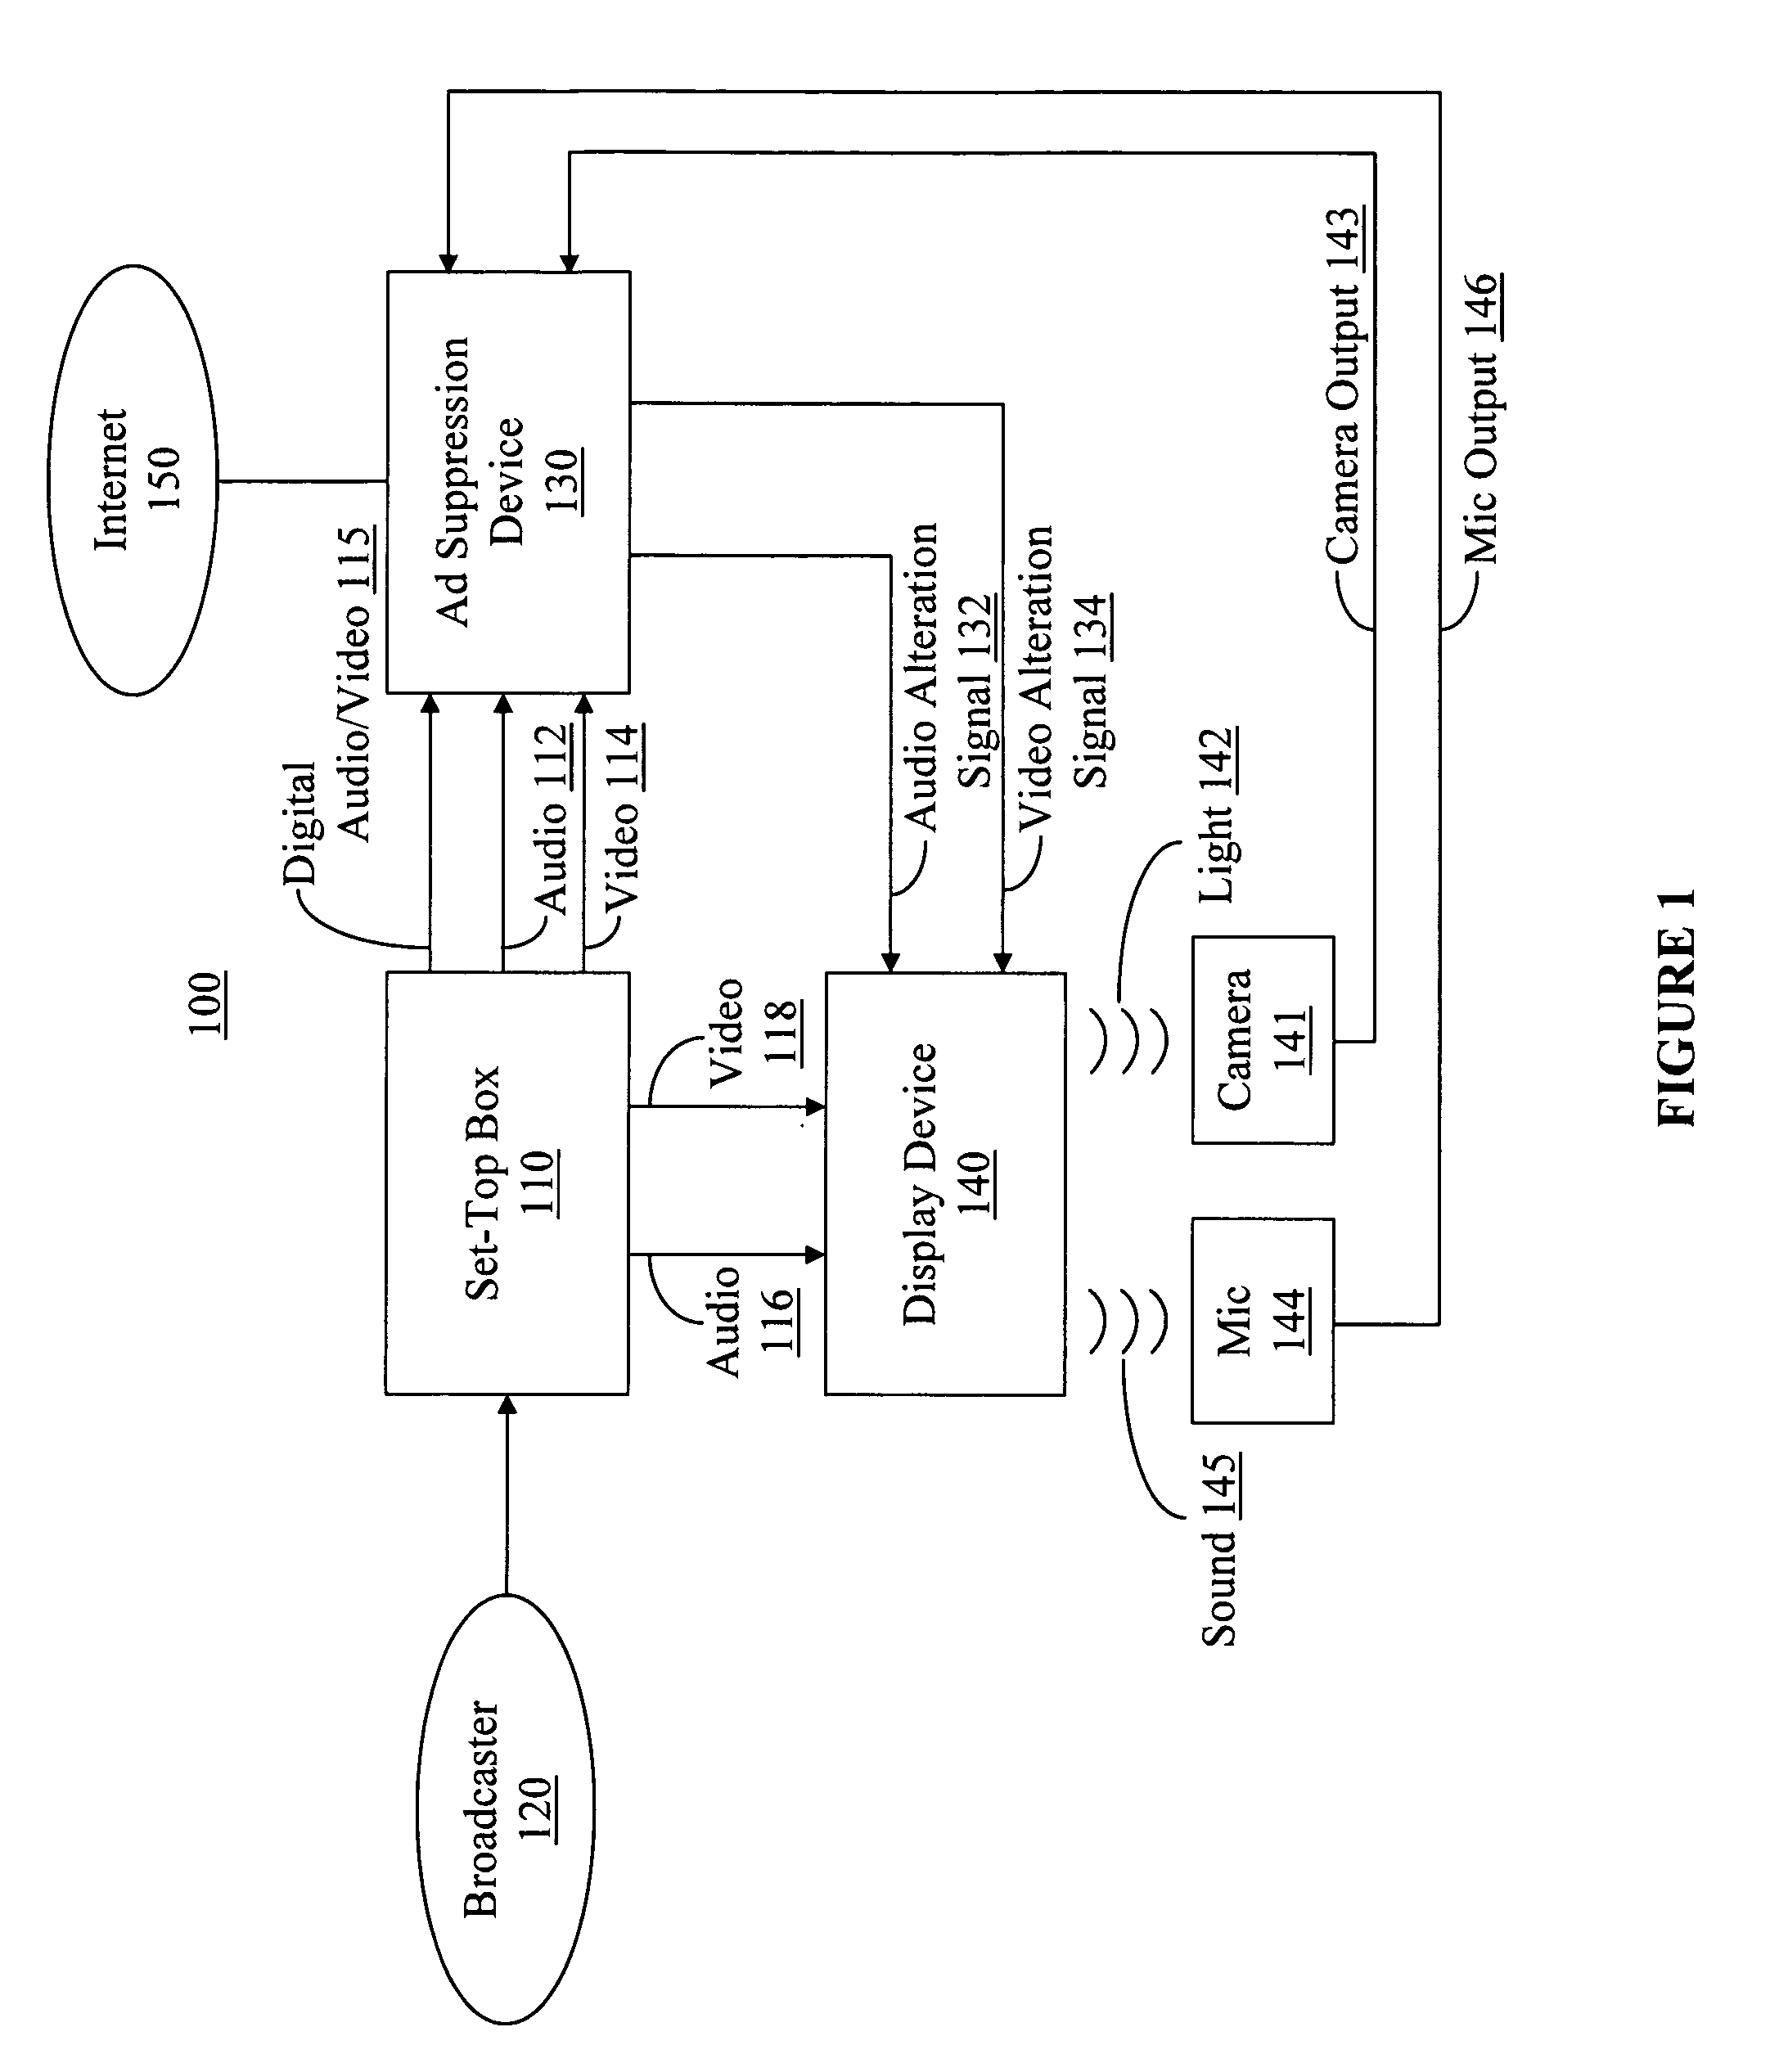 Method and system for altering the presentation of recorded content